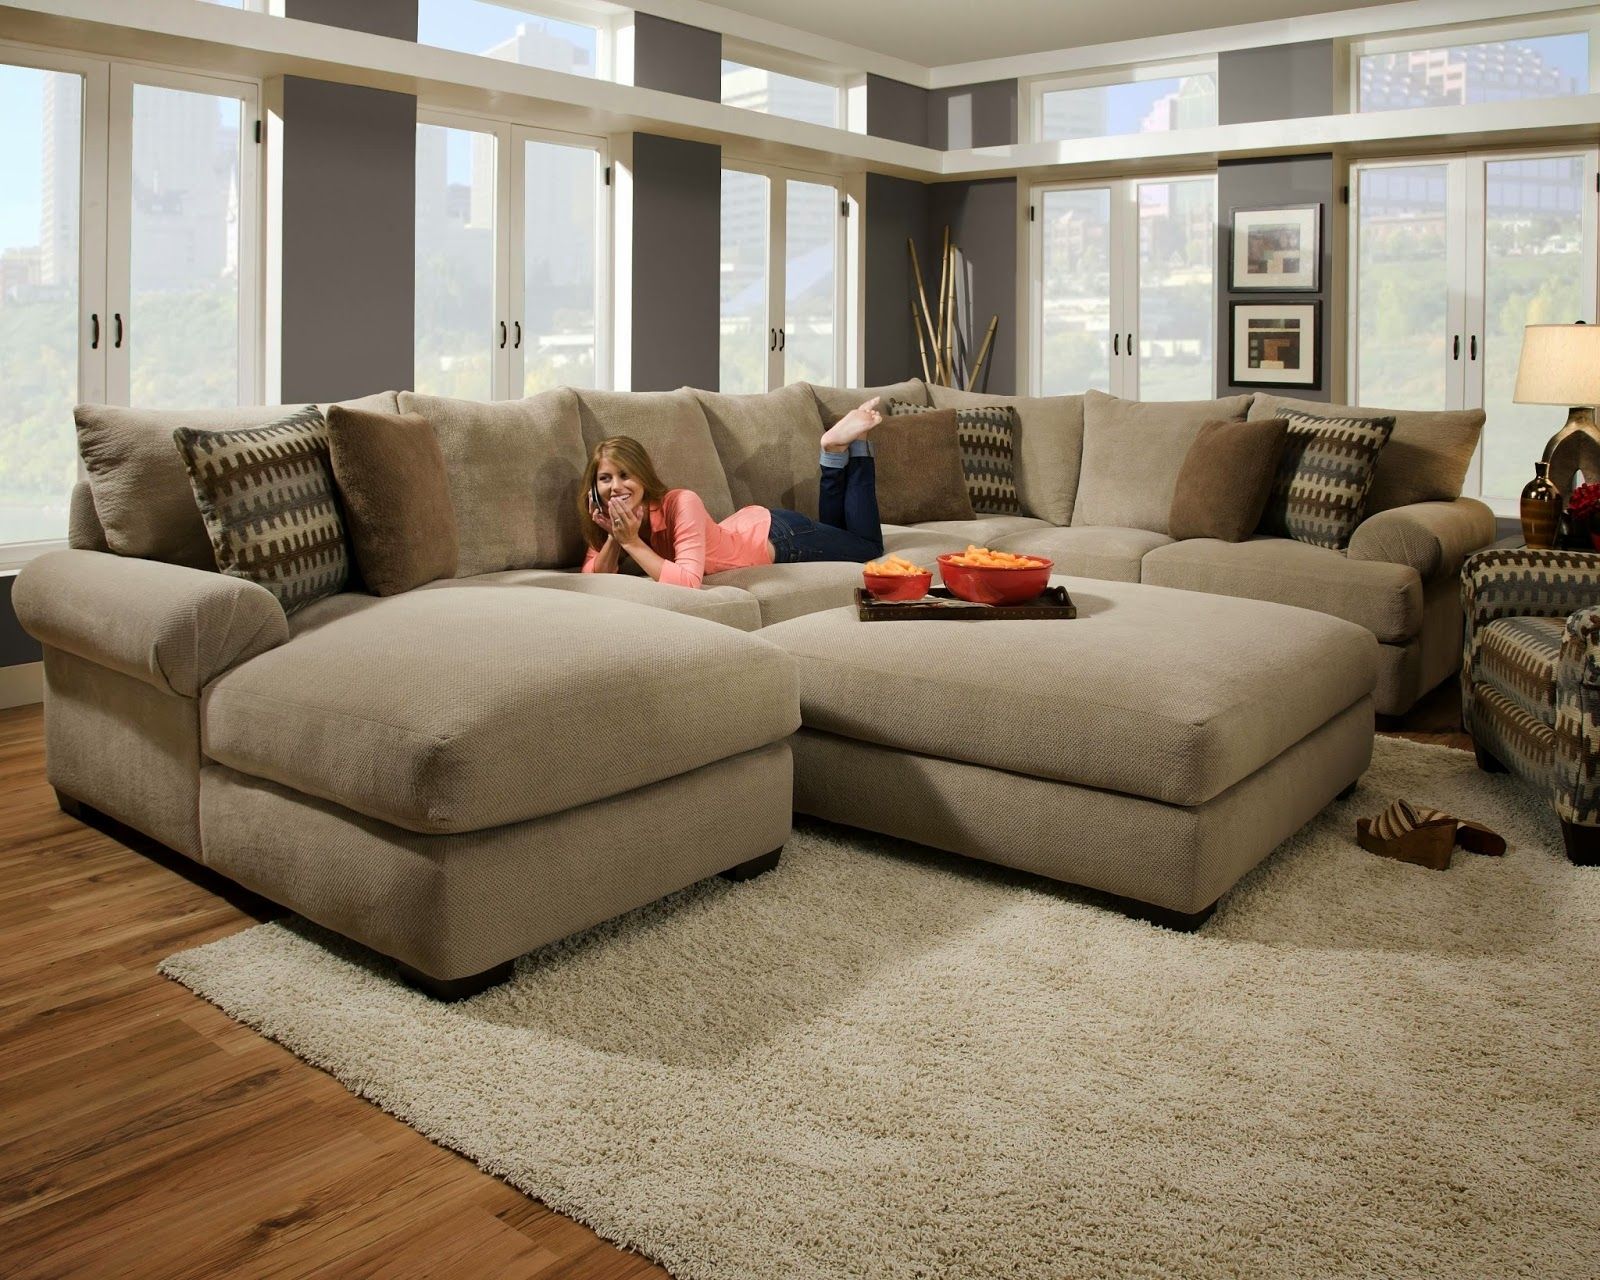 Gallery of Sofas with Ottomans in Brown (View 4 of 15 Photos)